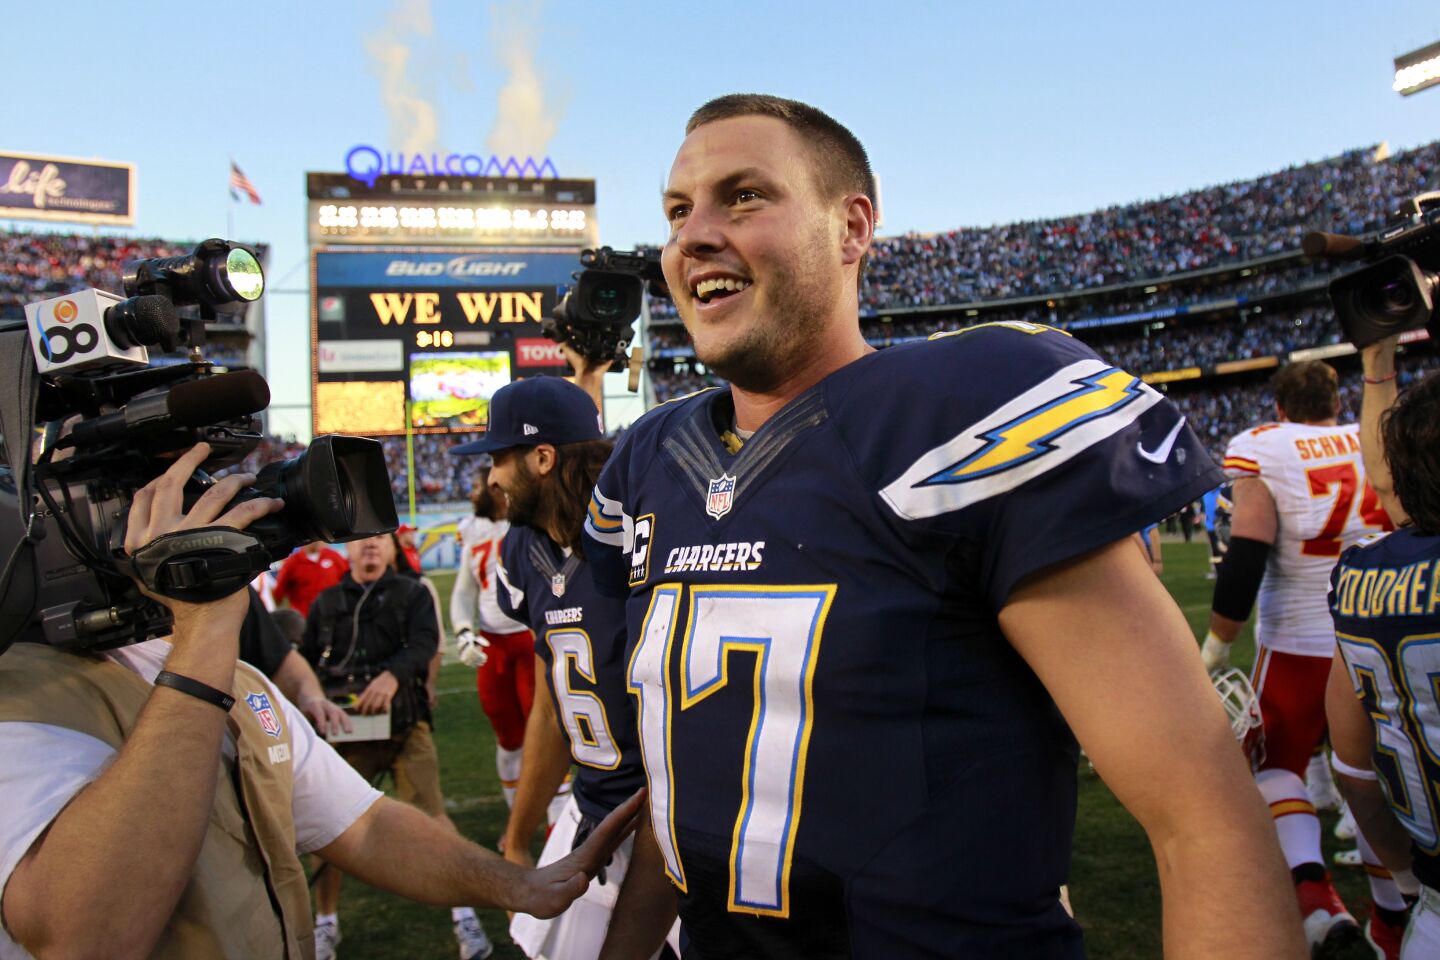 San Diego Chargers quarterback Philip Rivers celebrates after beating the Kansas City Chiefs 27-24 at Qualcomm Stadium on Dec. 29, 2013.